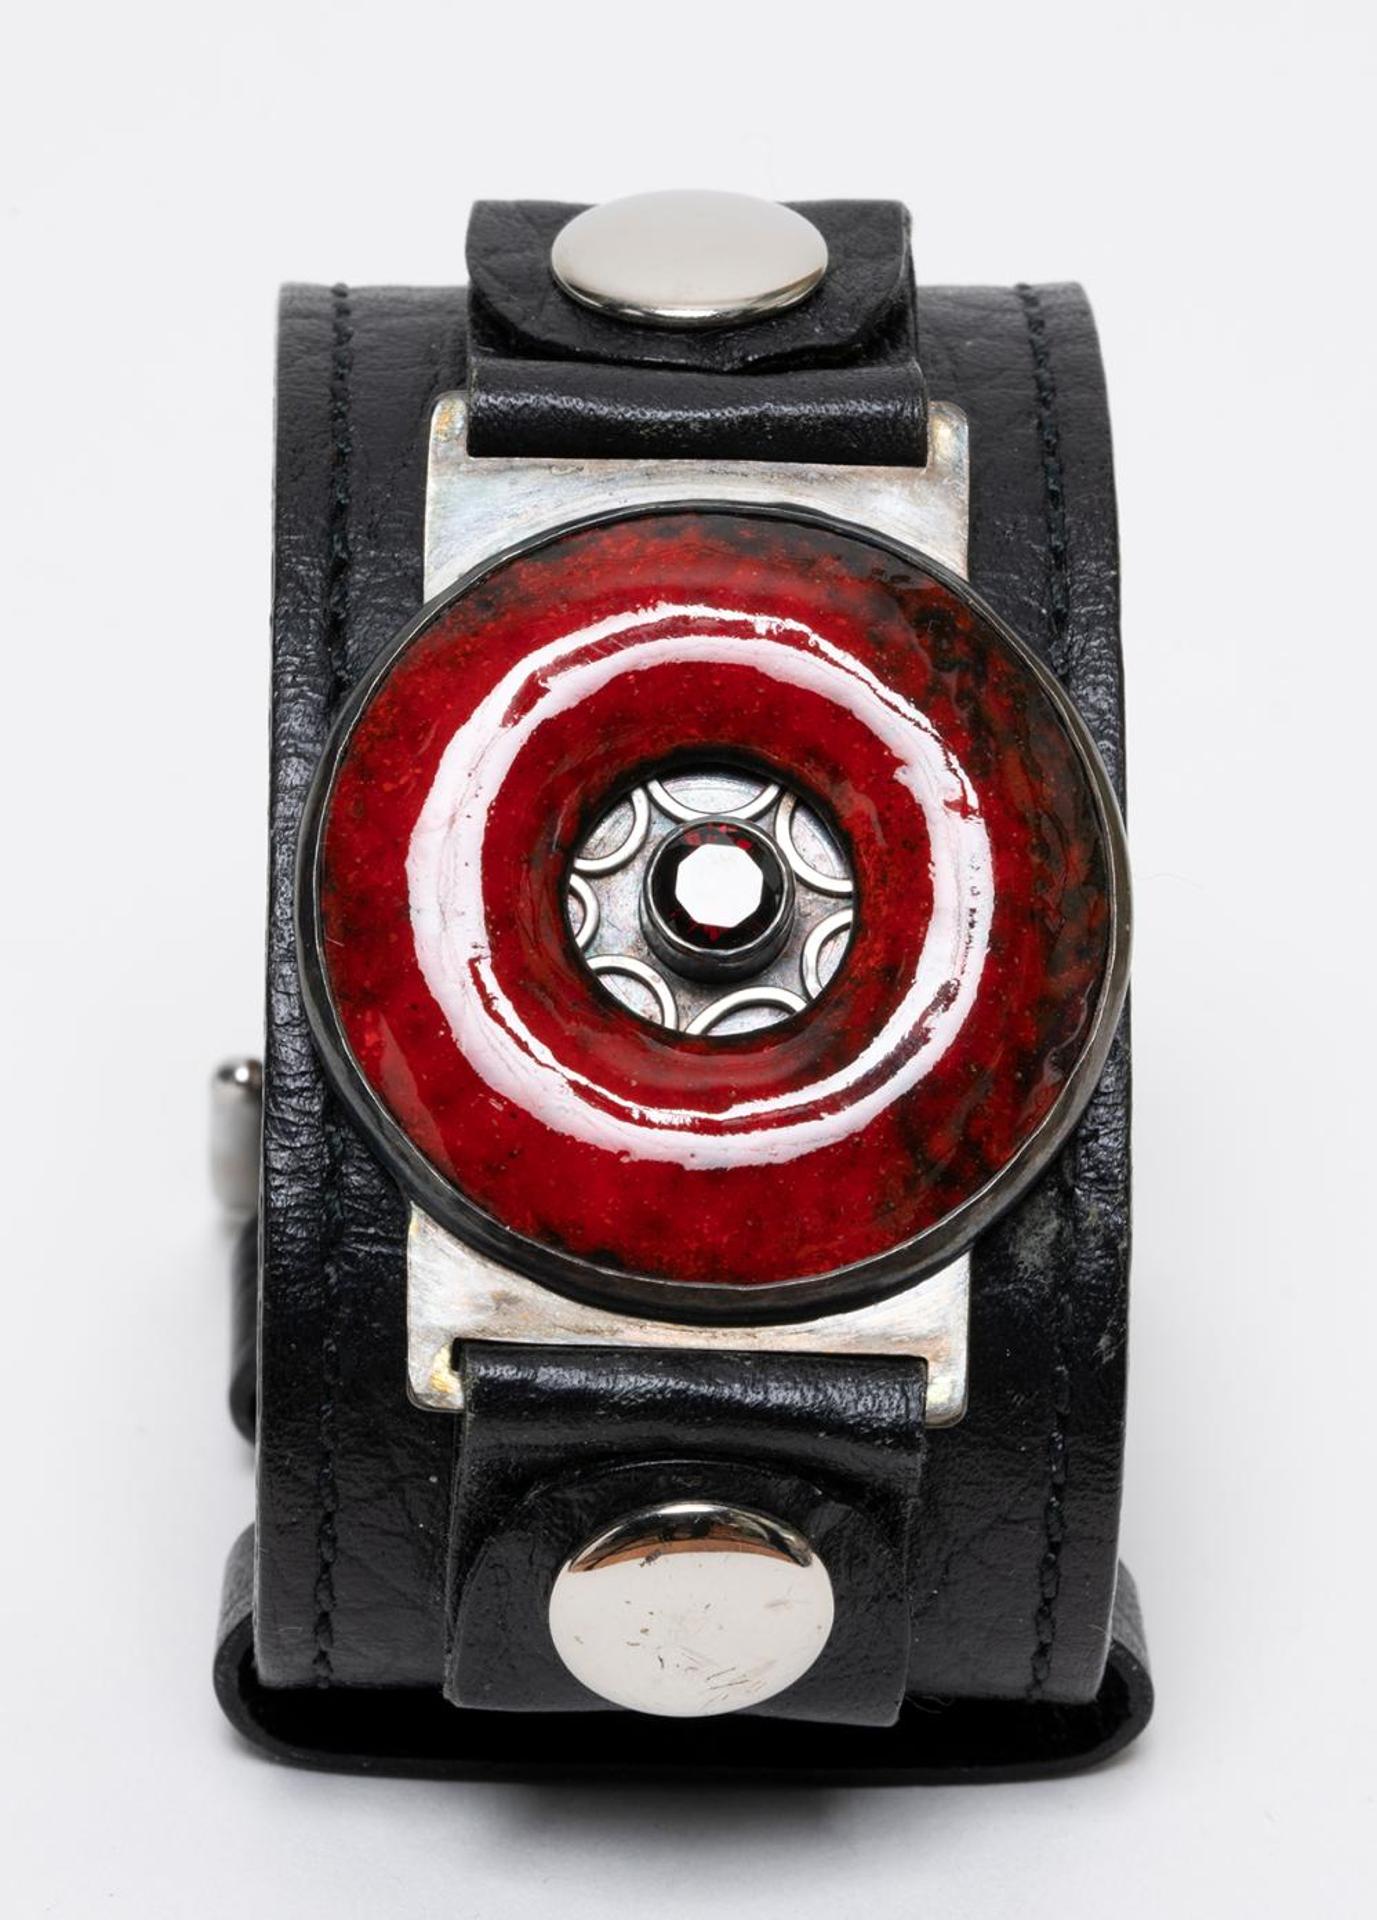 Melody Armstrong (1965) - Garnet and Enamel Donut Wrist Band